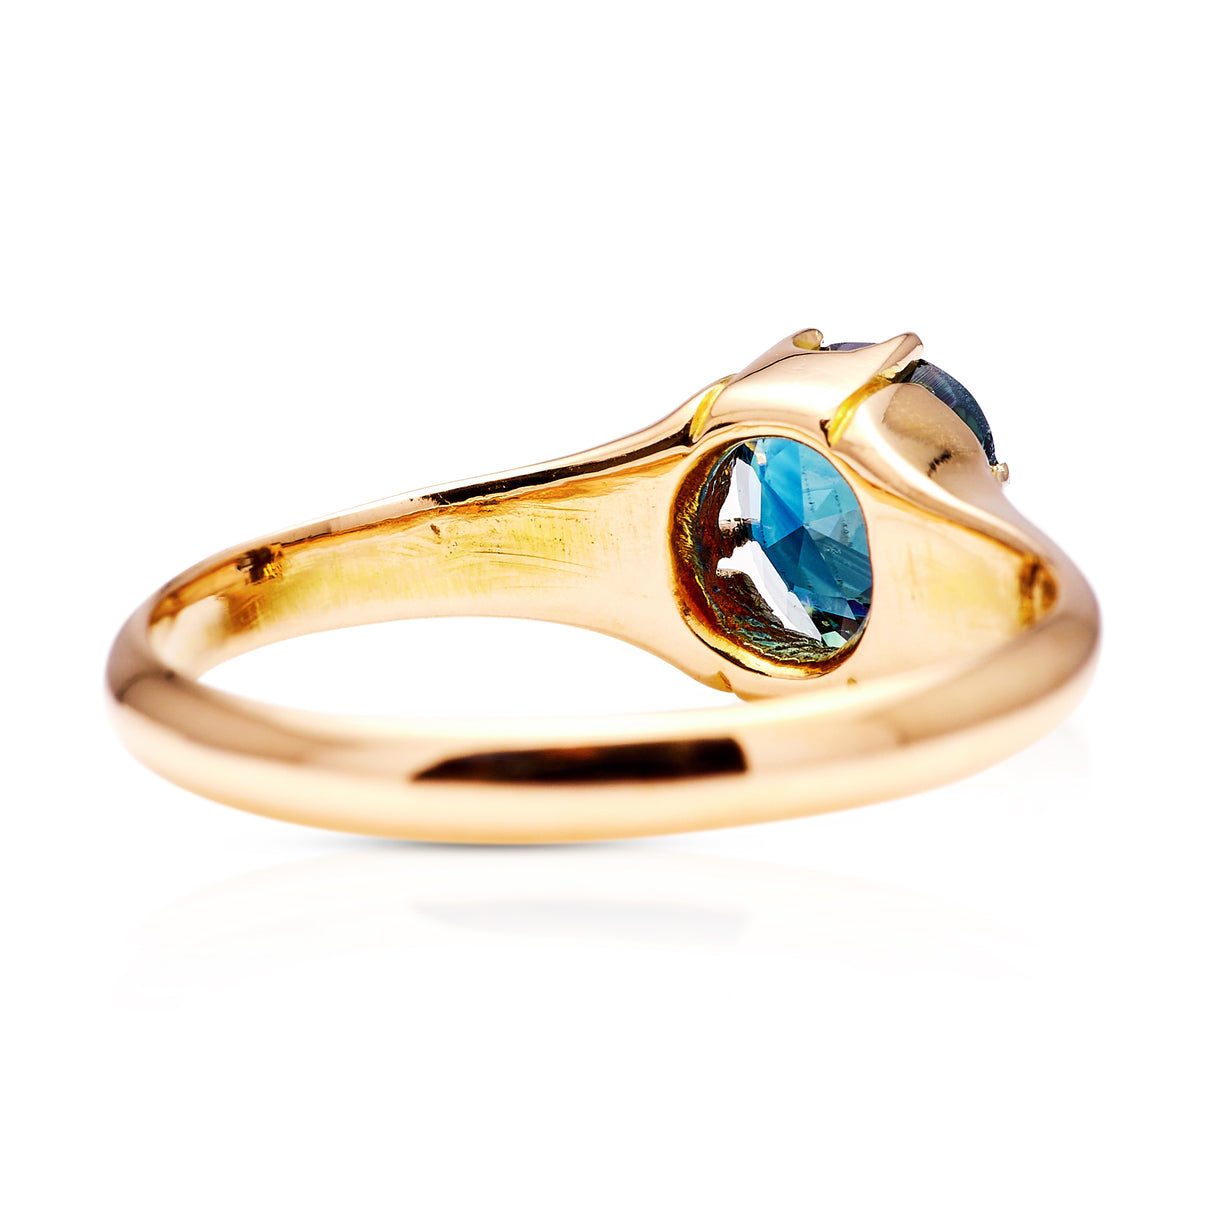 Antique, Edwardian Single-Stone Old Cut Teal Sapphire Ring, 18ct Rosy Yellow Gold